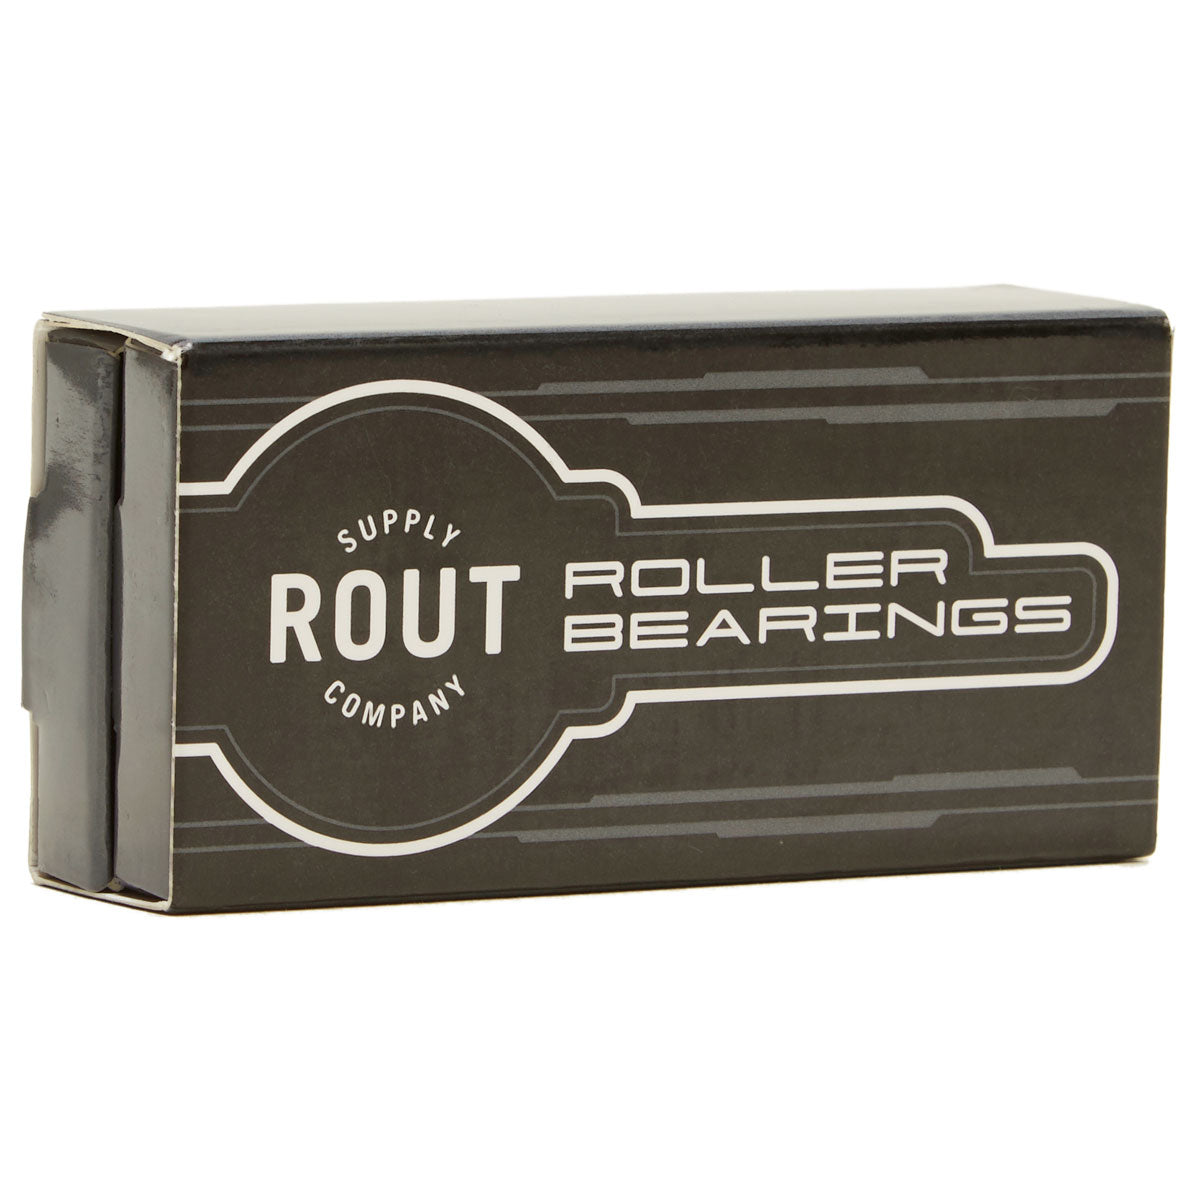 Rout Supply Co. Roller Bearings - 16 Pack - 8mm image 2